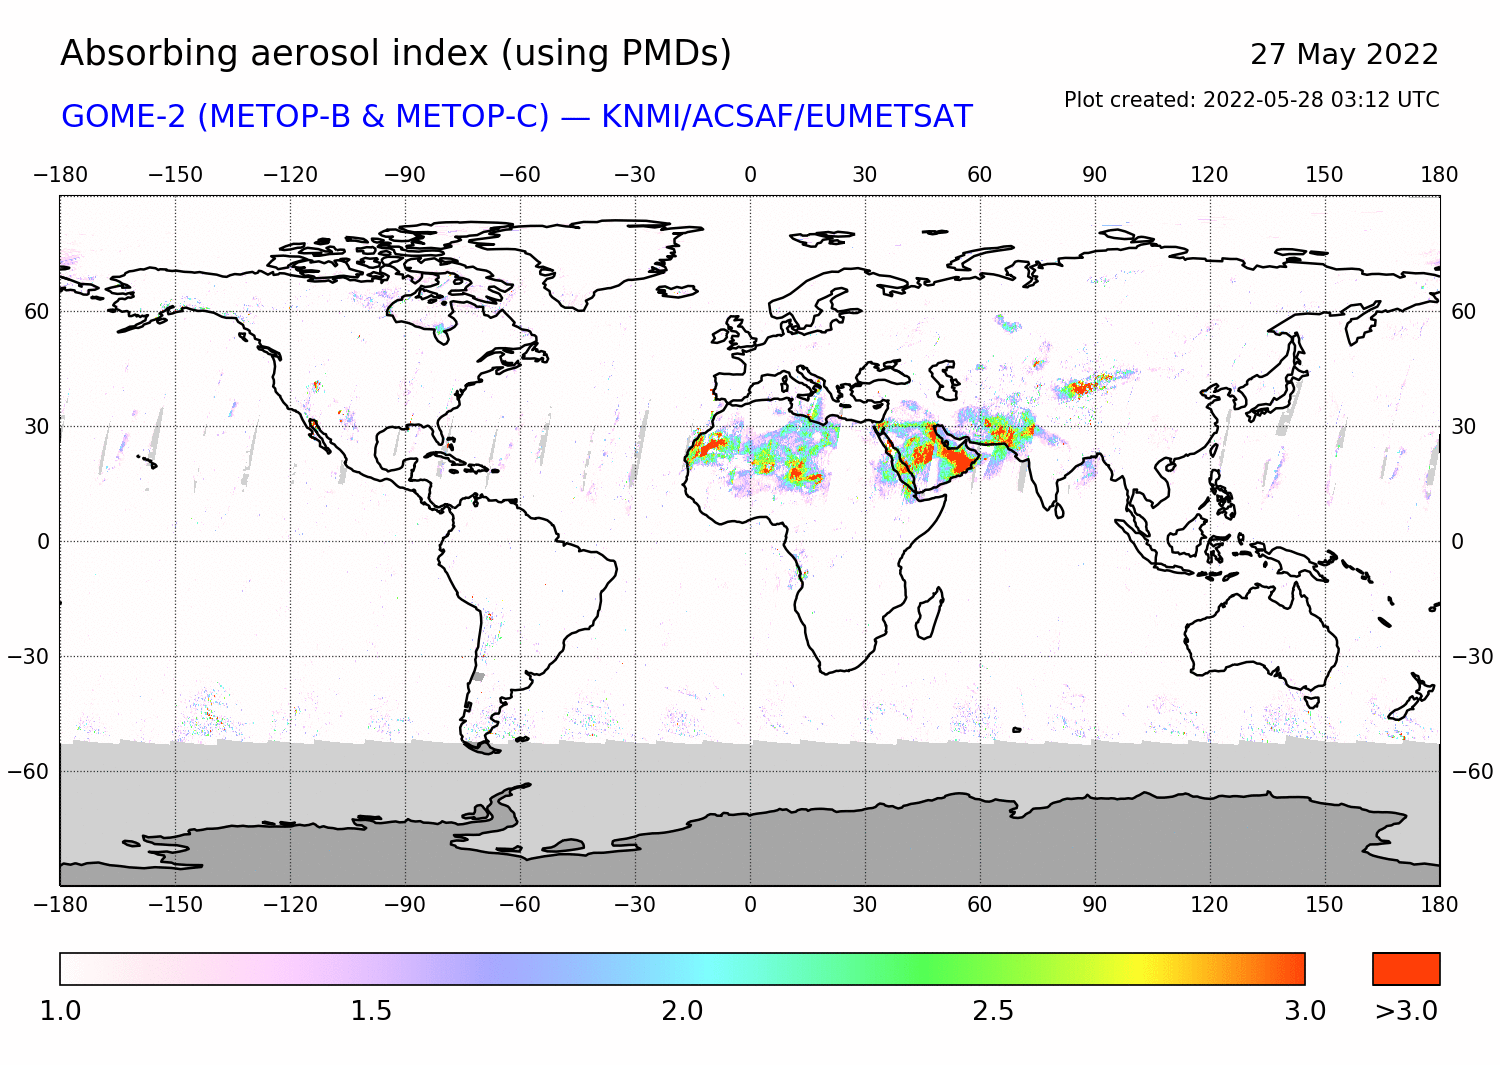 GOME-2 - Absorbing aerosol index of 27 May 2022